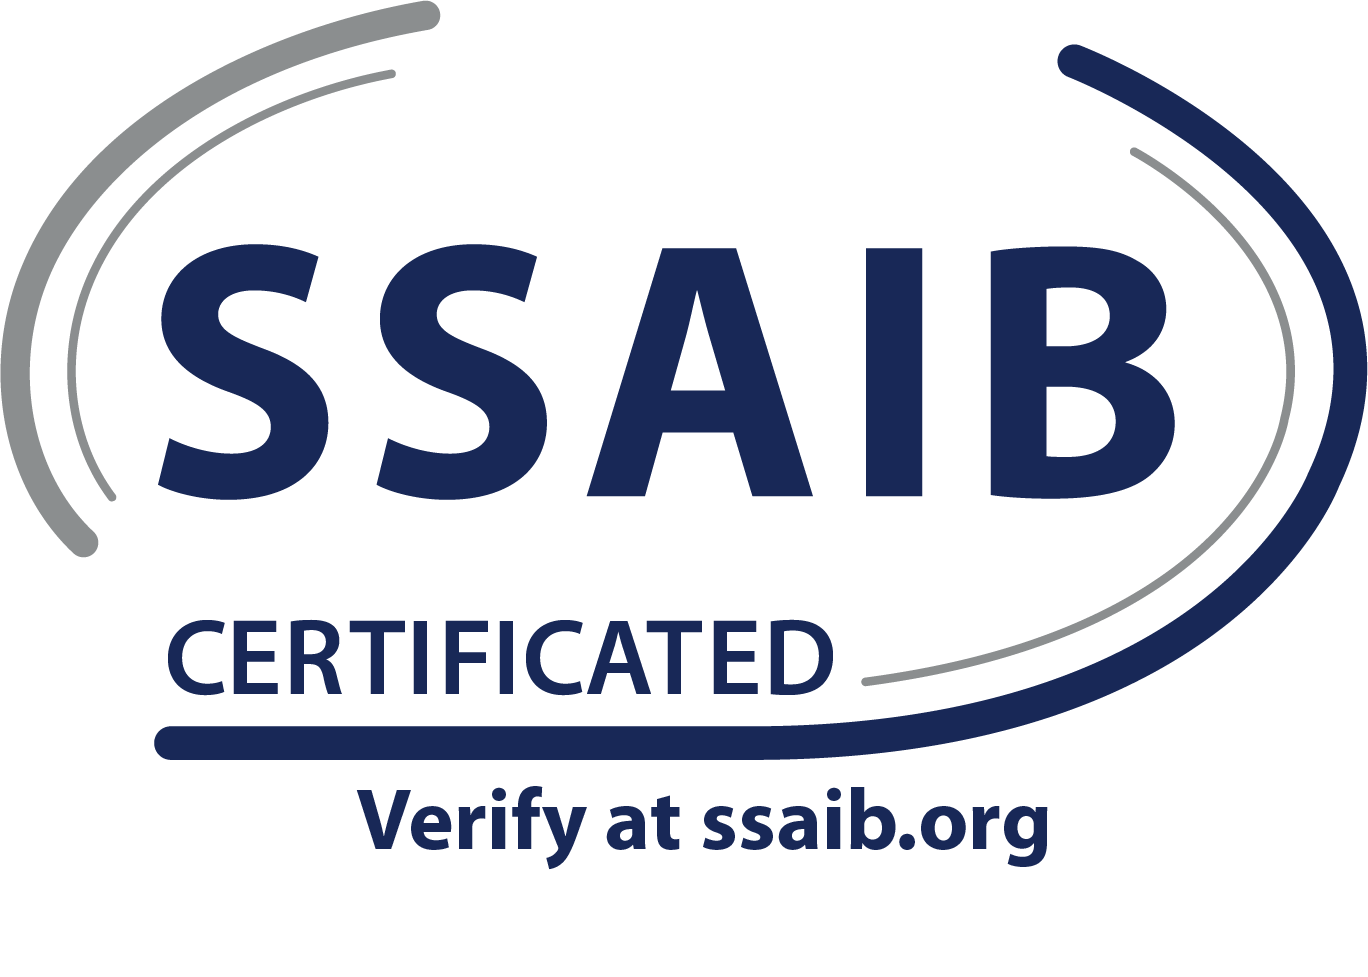 SSAIB accreditted